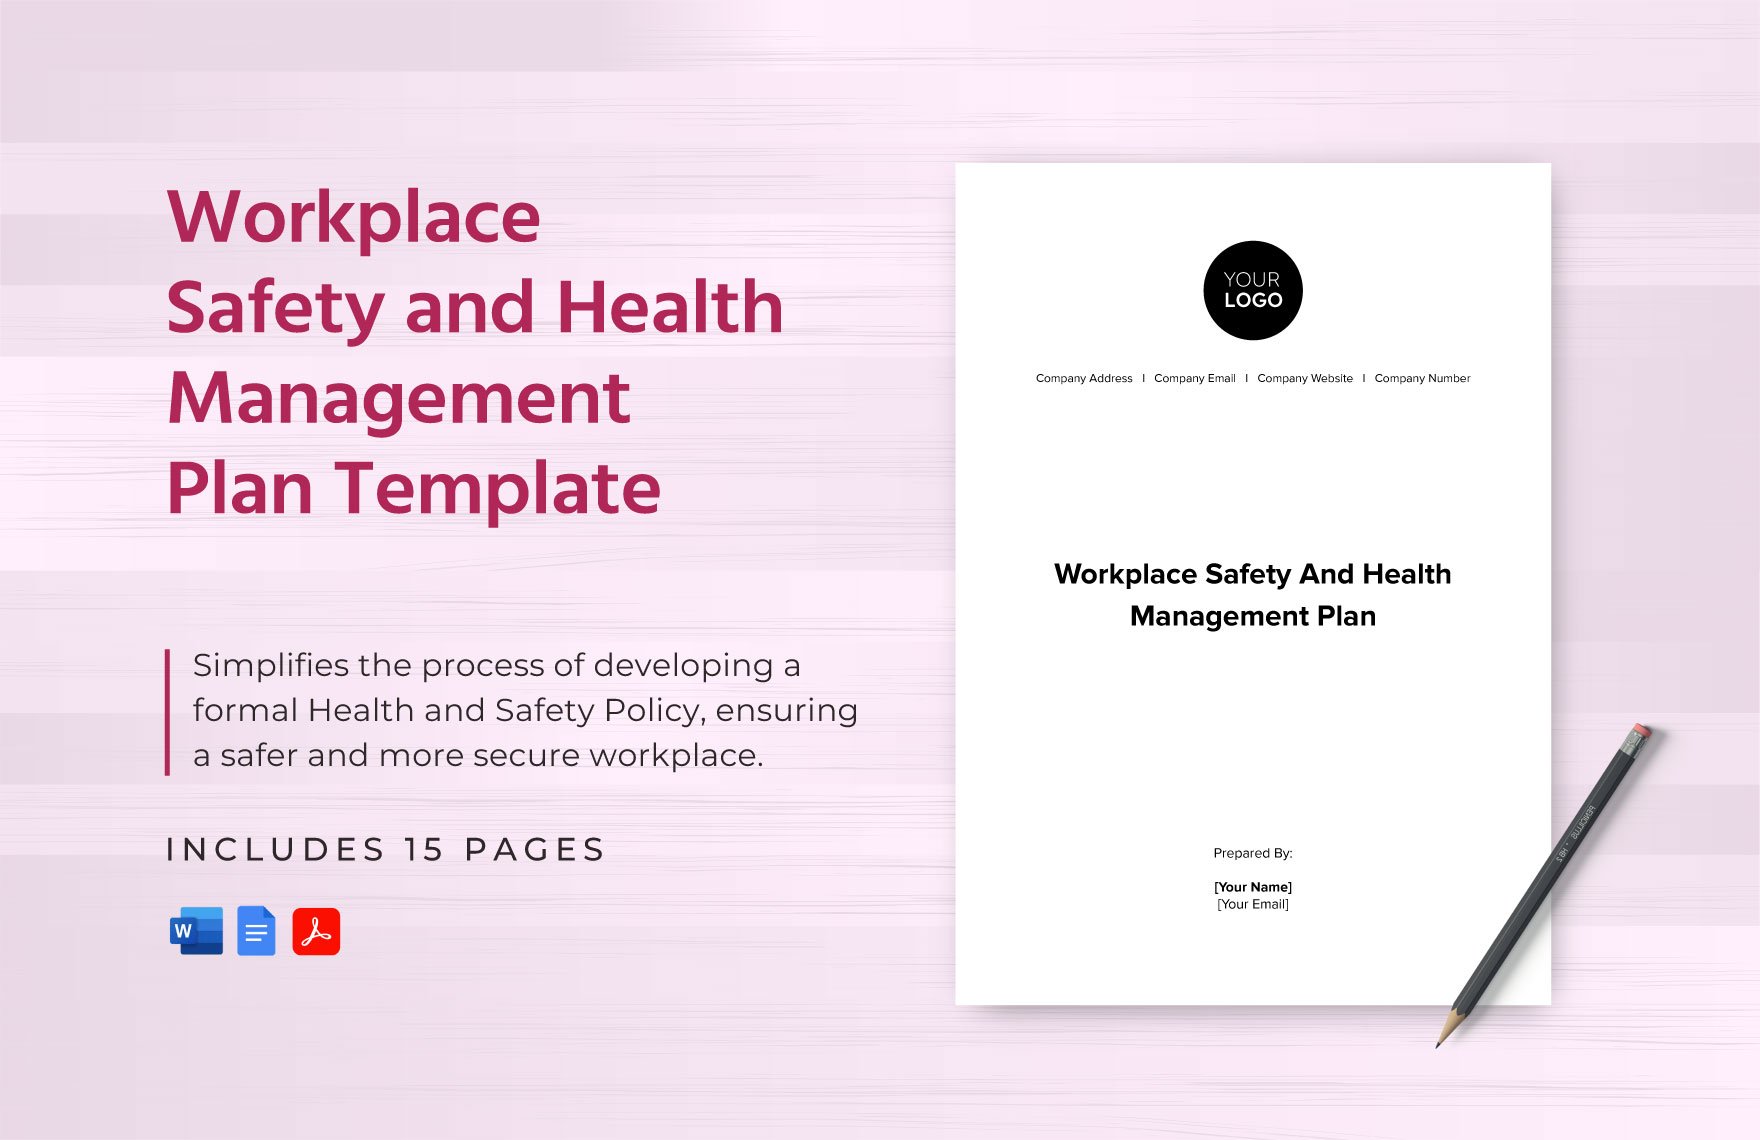 Workplace Safety and Health Management Plan Template in Word, Google Docs, PDF